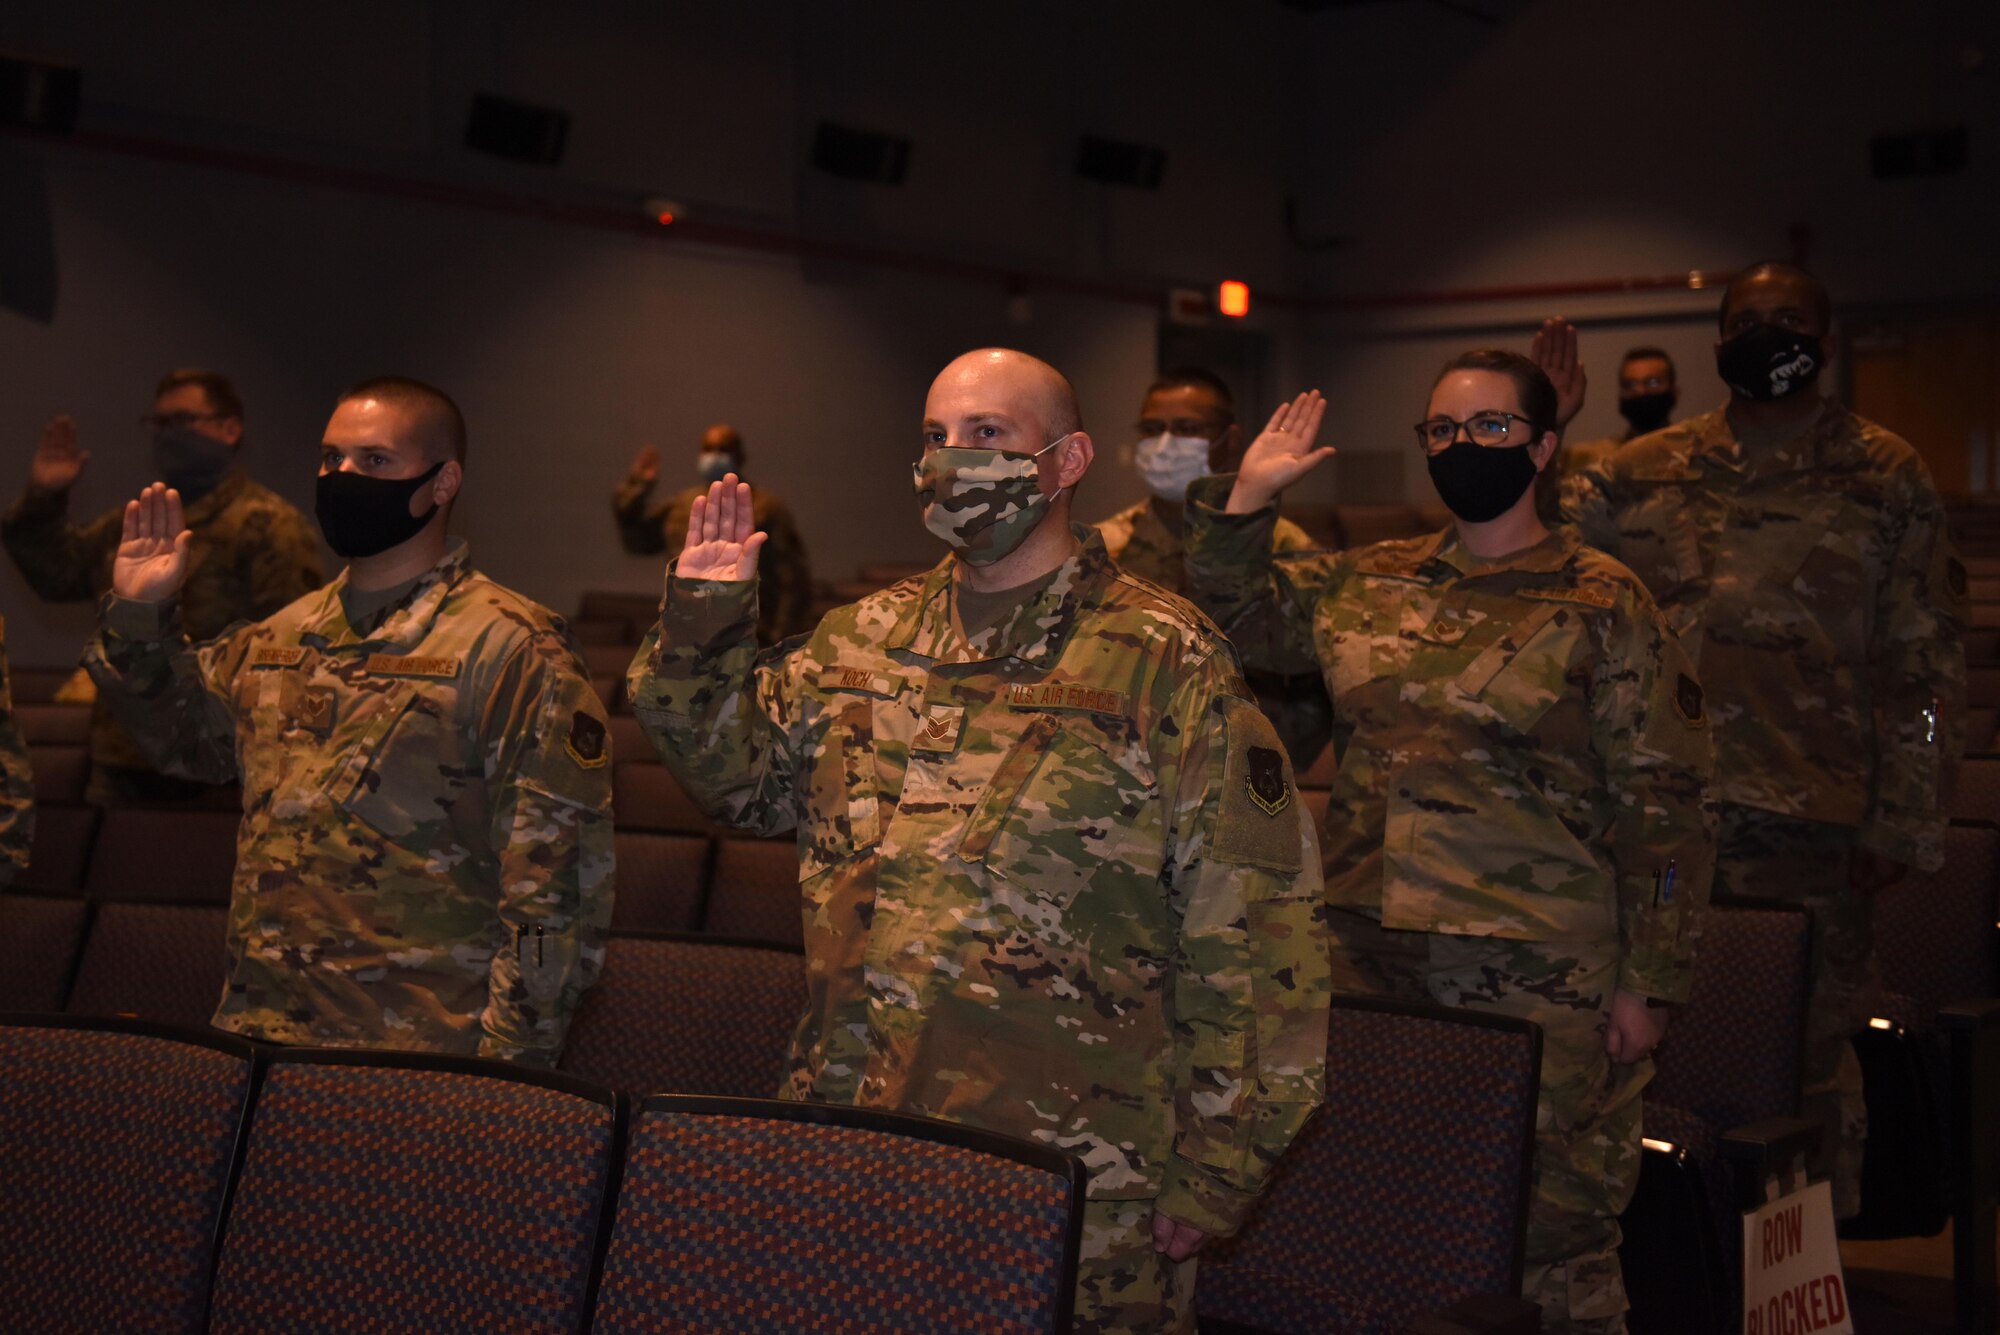 The 924th Fighter Group celebrated their newest noncommissioned and senior noncommissioned officers’ Nov. 7 during an induction ceremony at Davis-Monthan Air Force Base, Arizona.